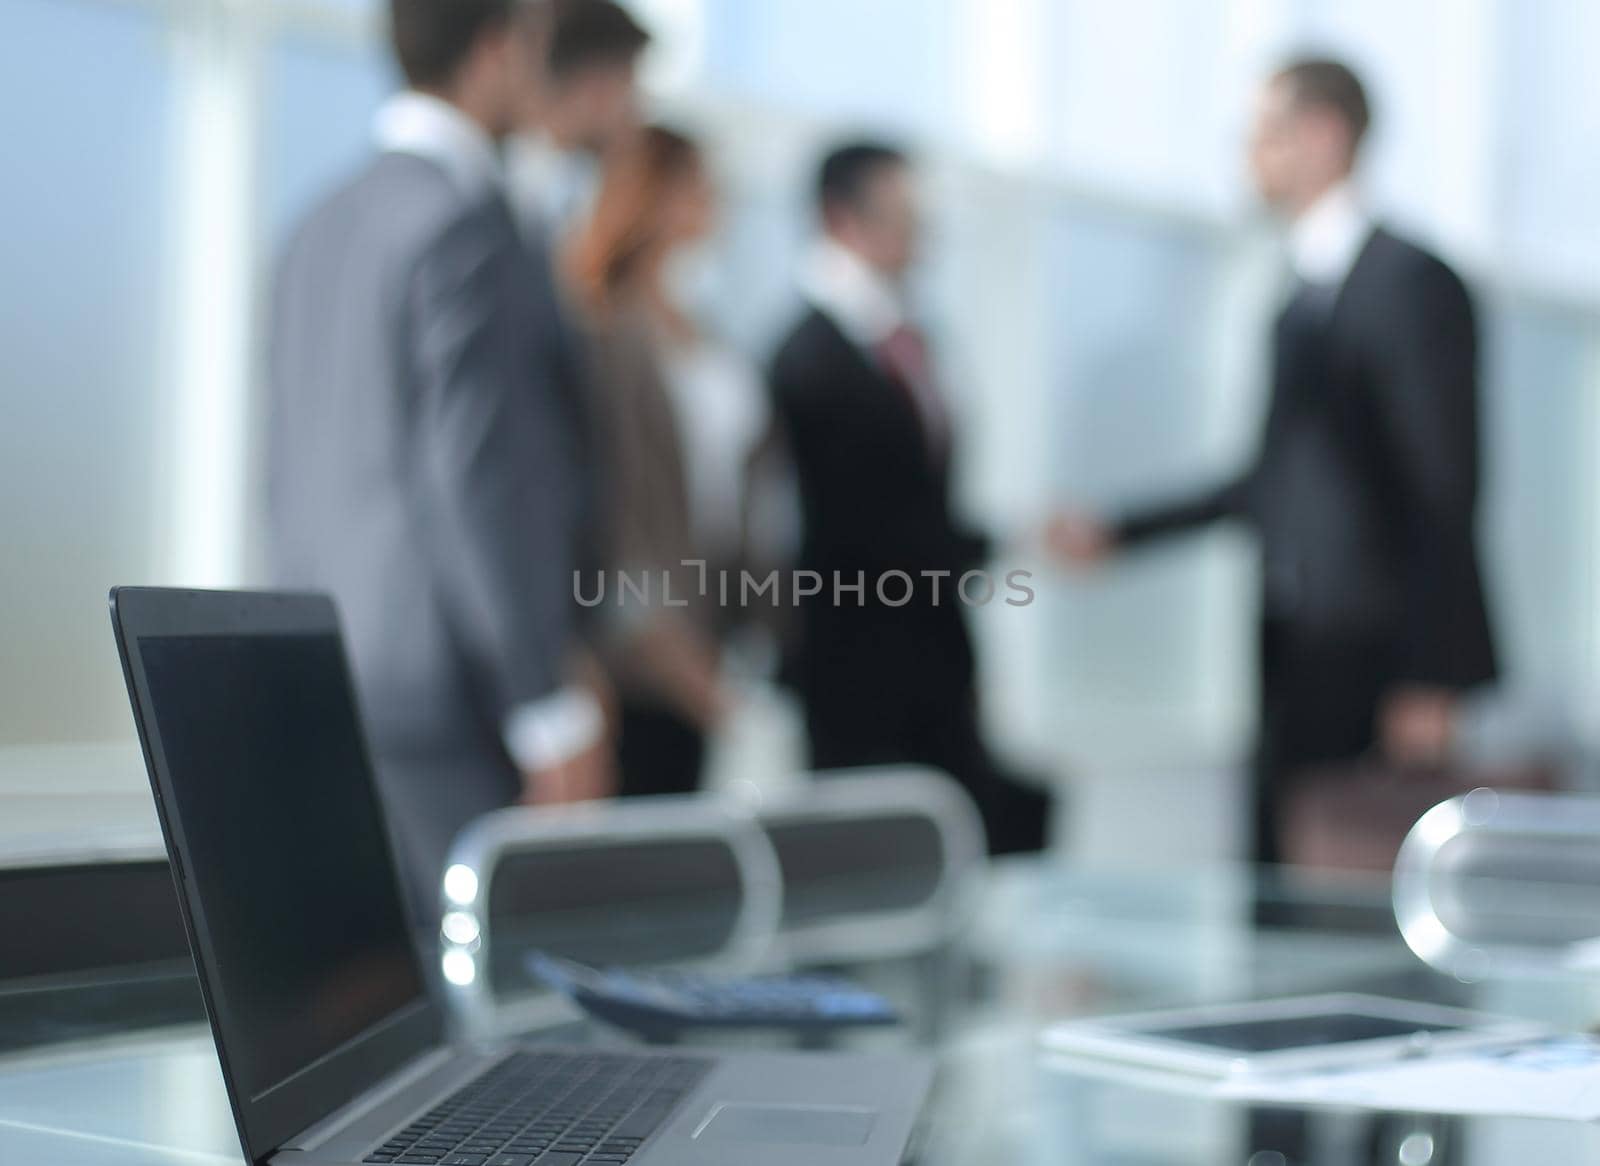 blurred image of a modern office.business background